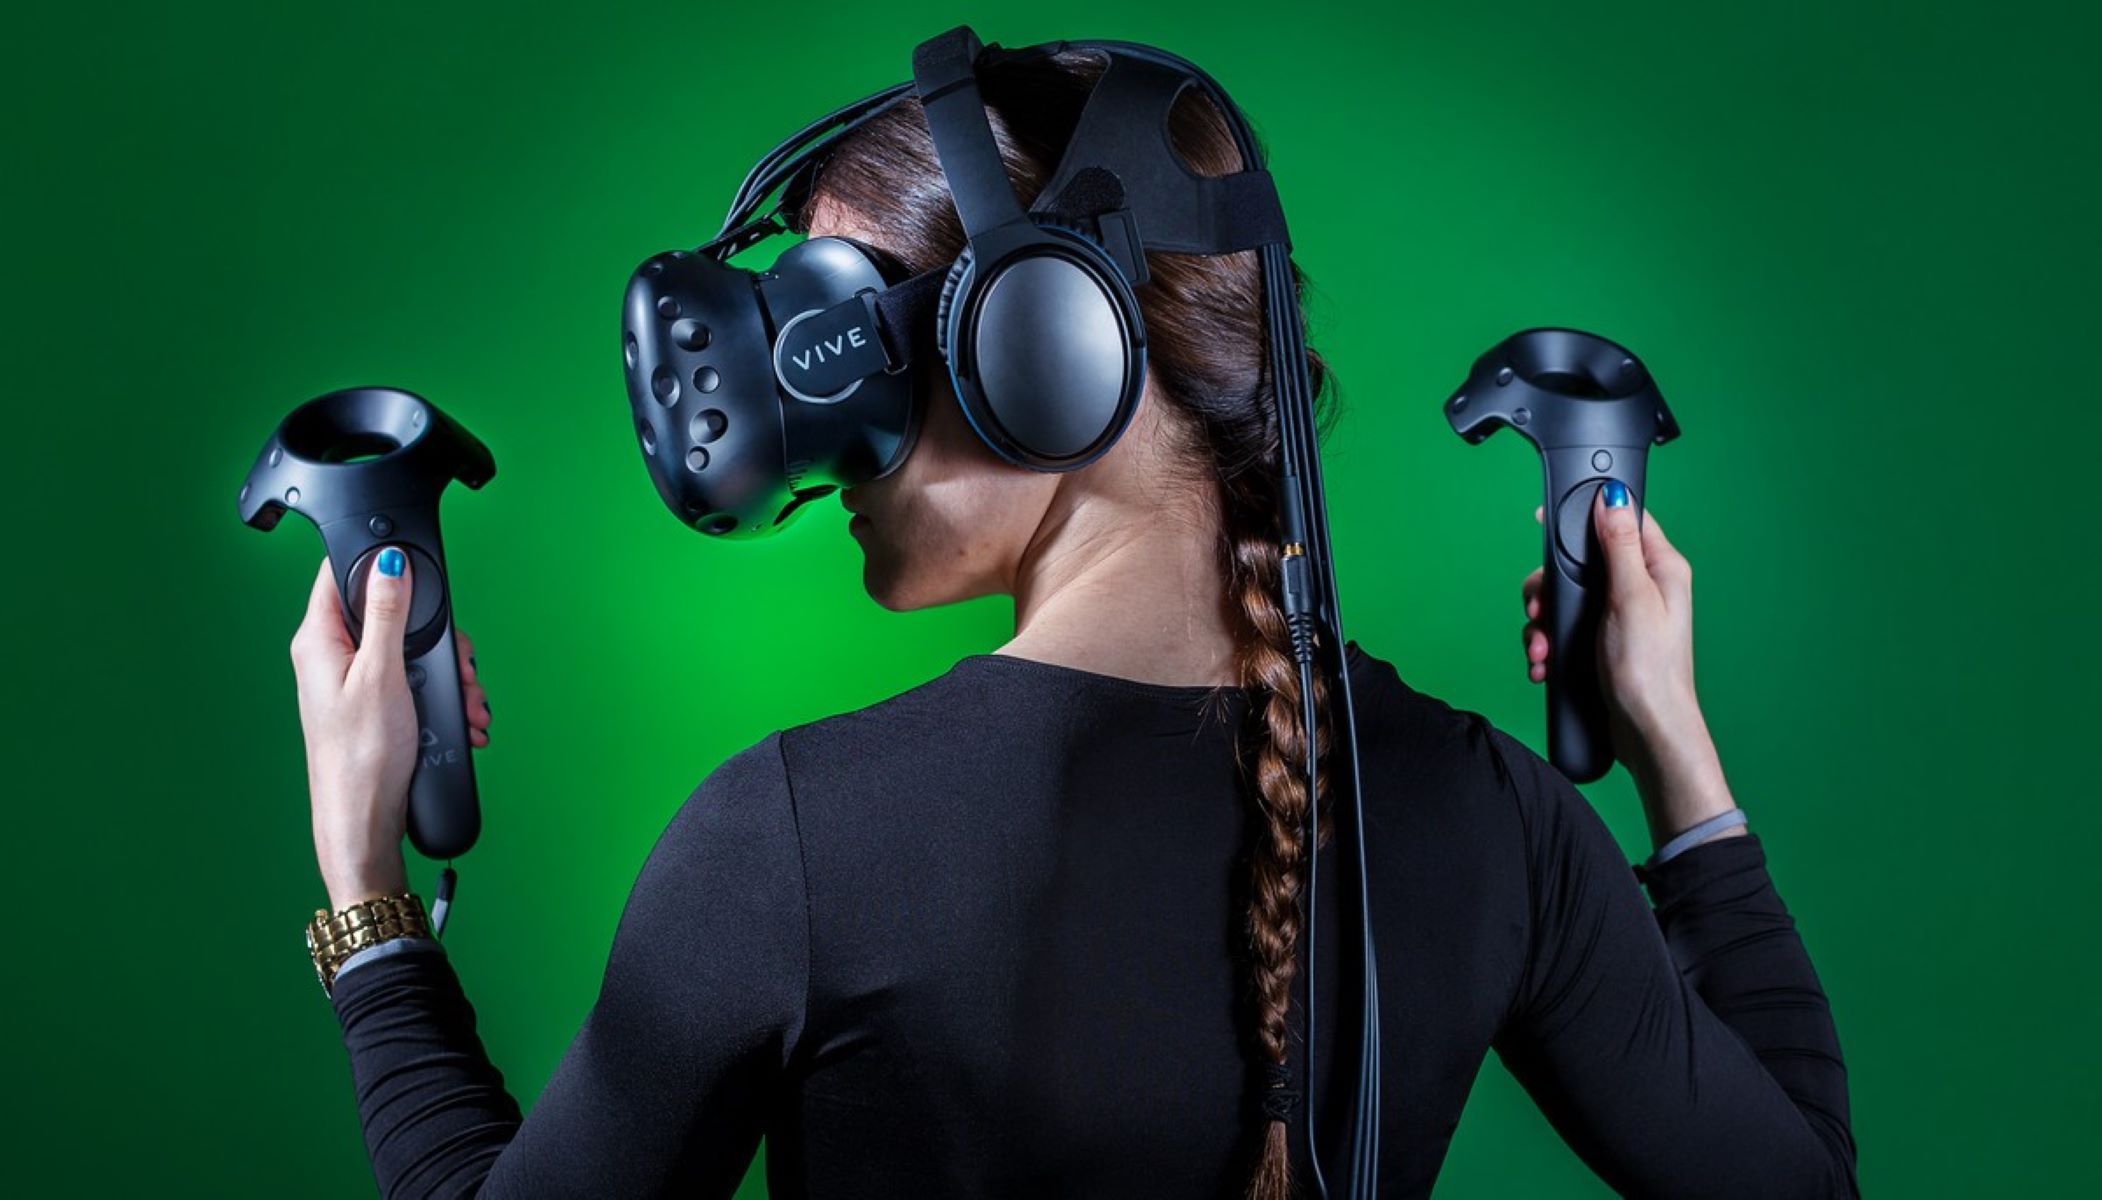 How Far Is The Screen From Your Face On The HTC Vive